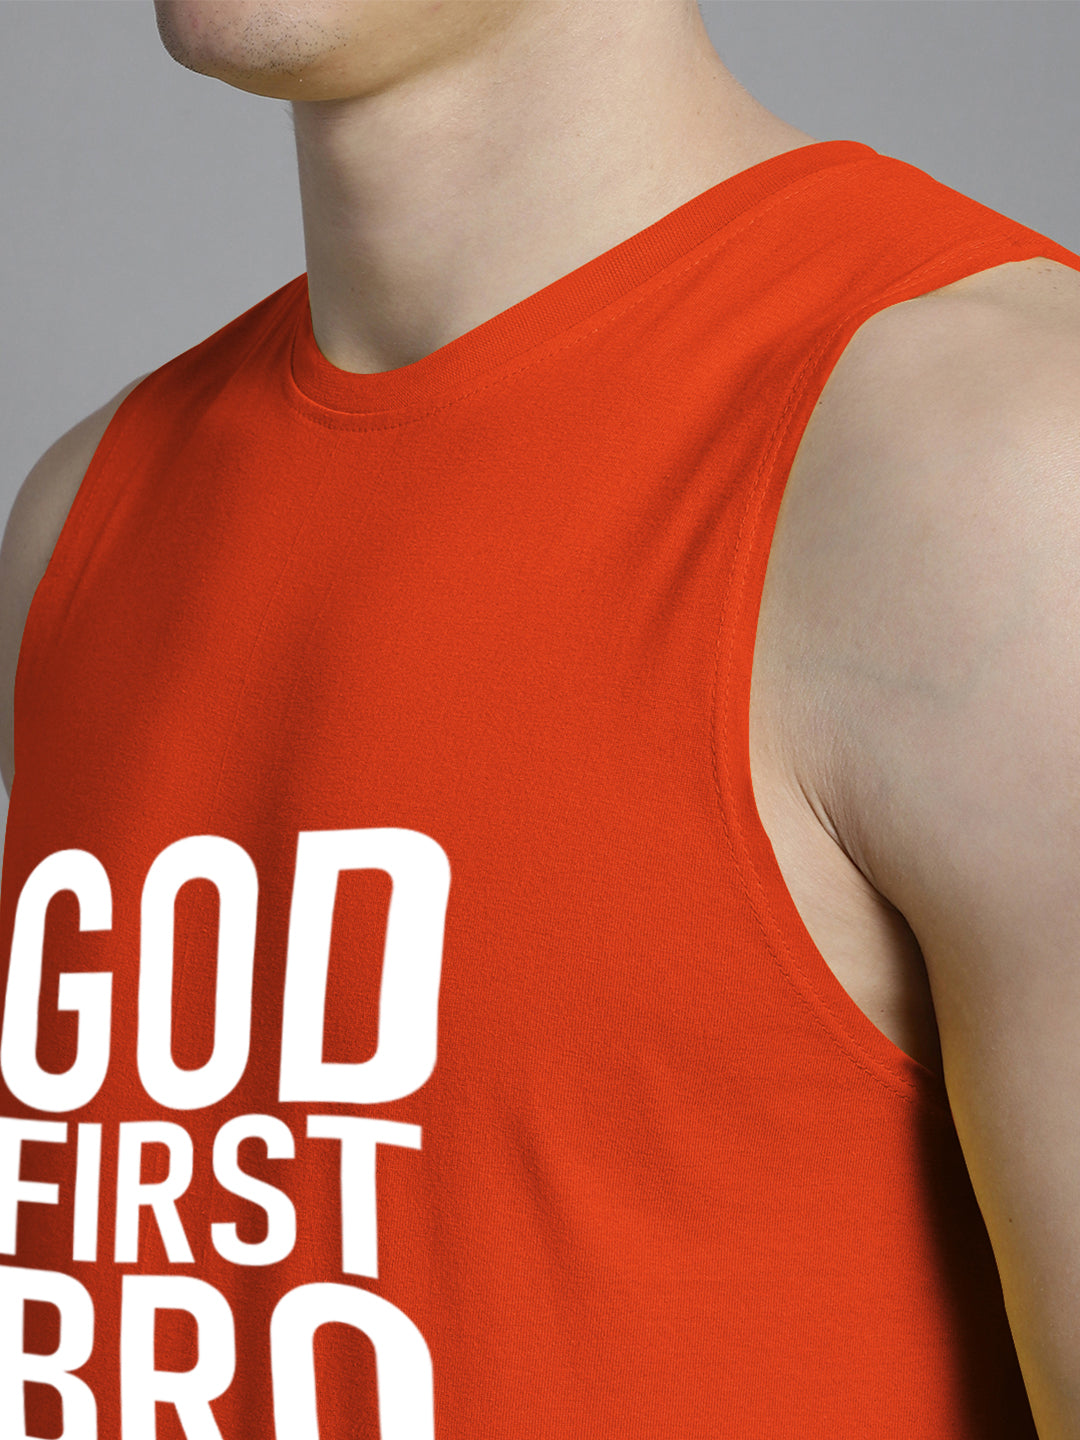 Fbar God First Bro printed Pure Cotton Training Vest - Friskers